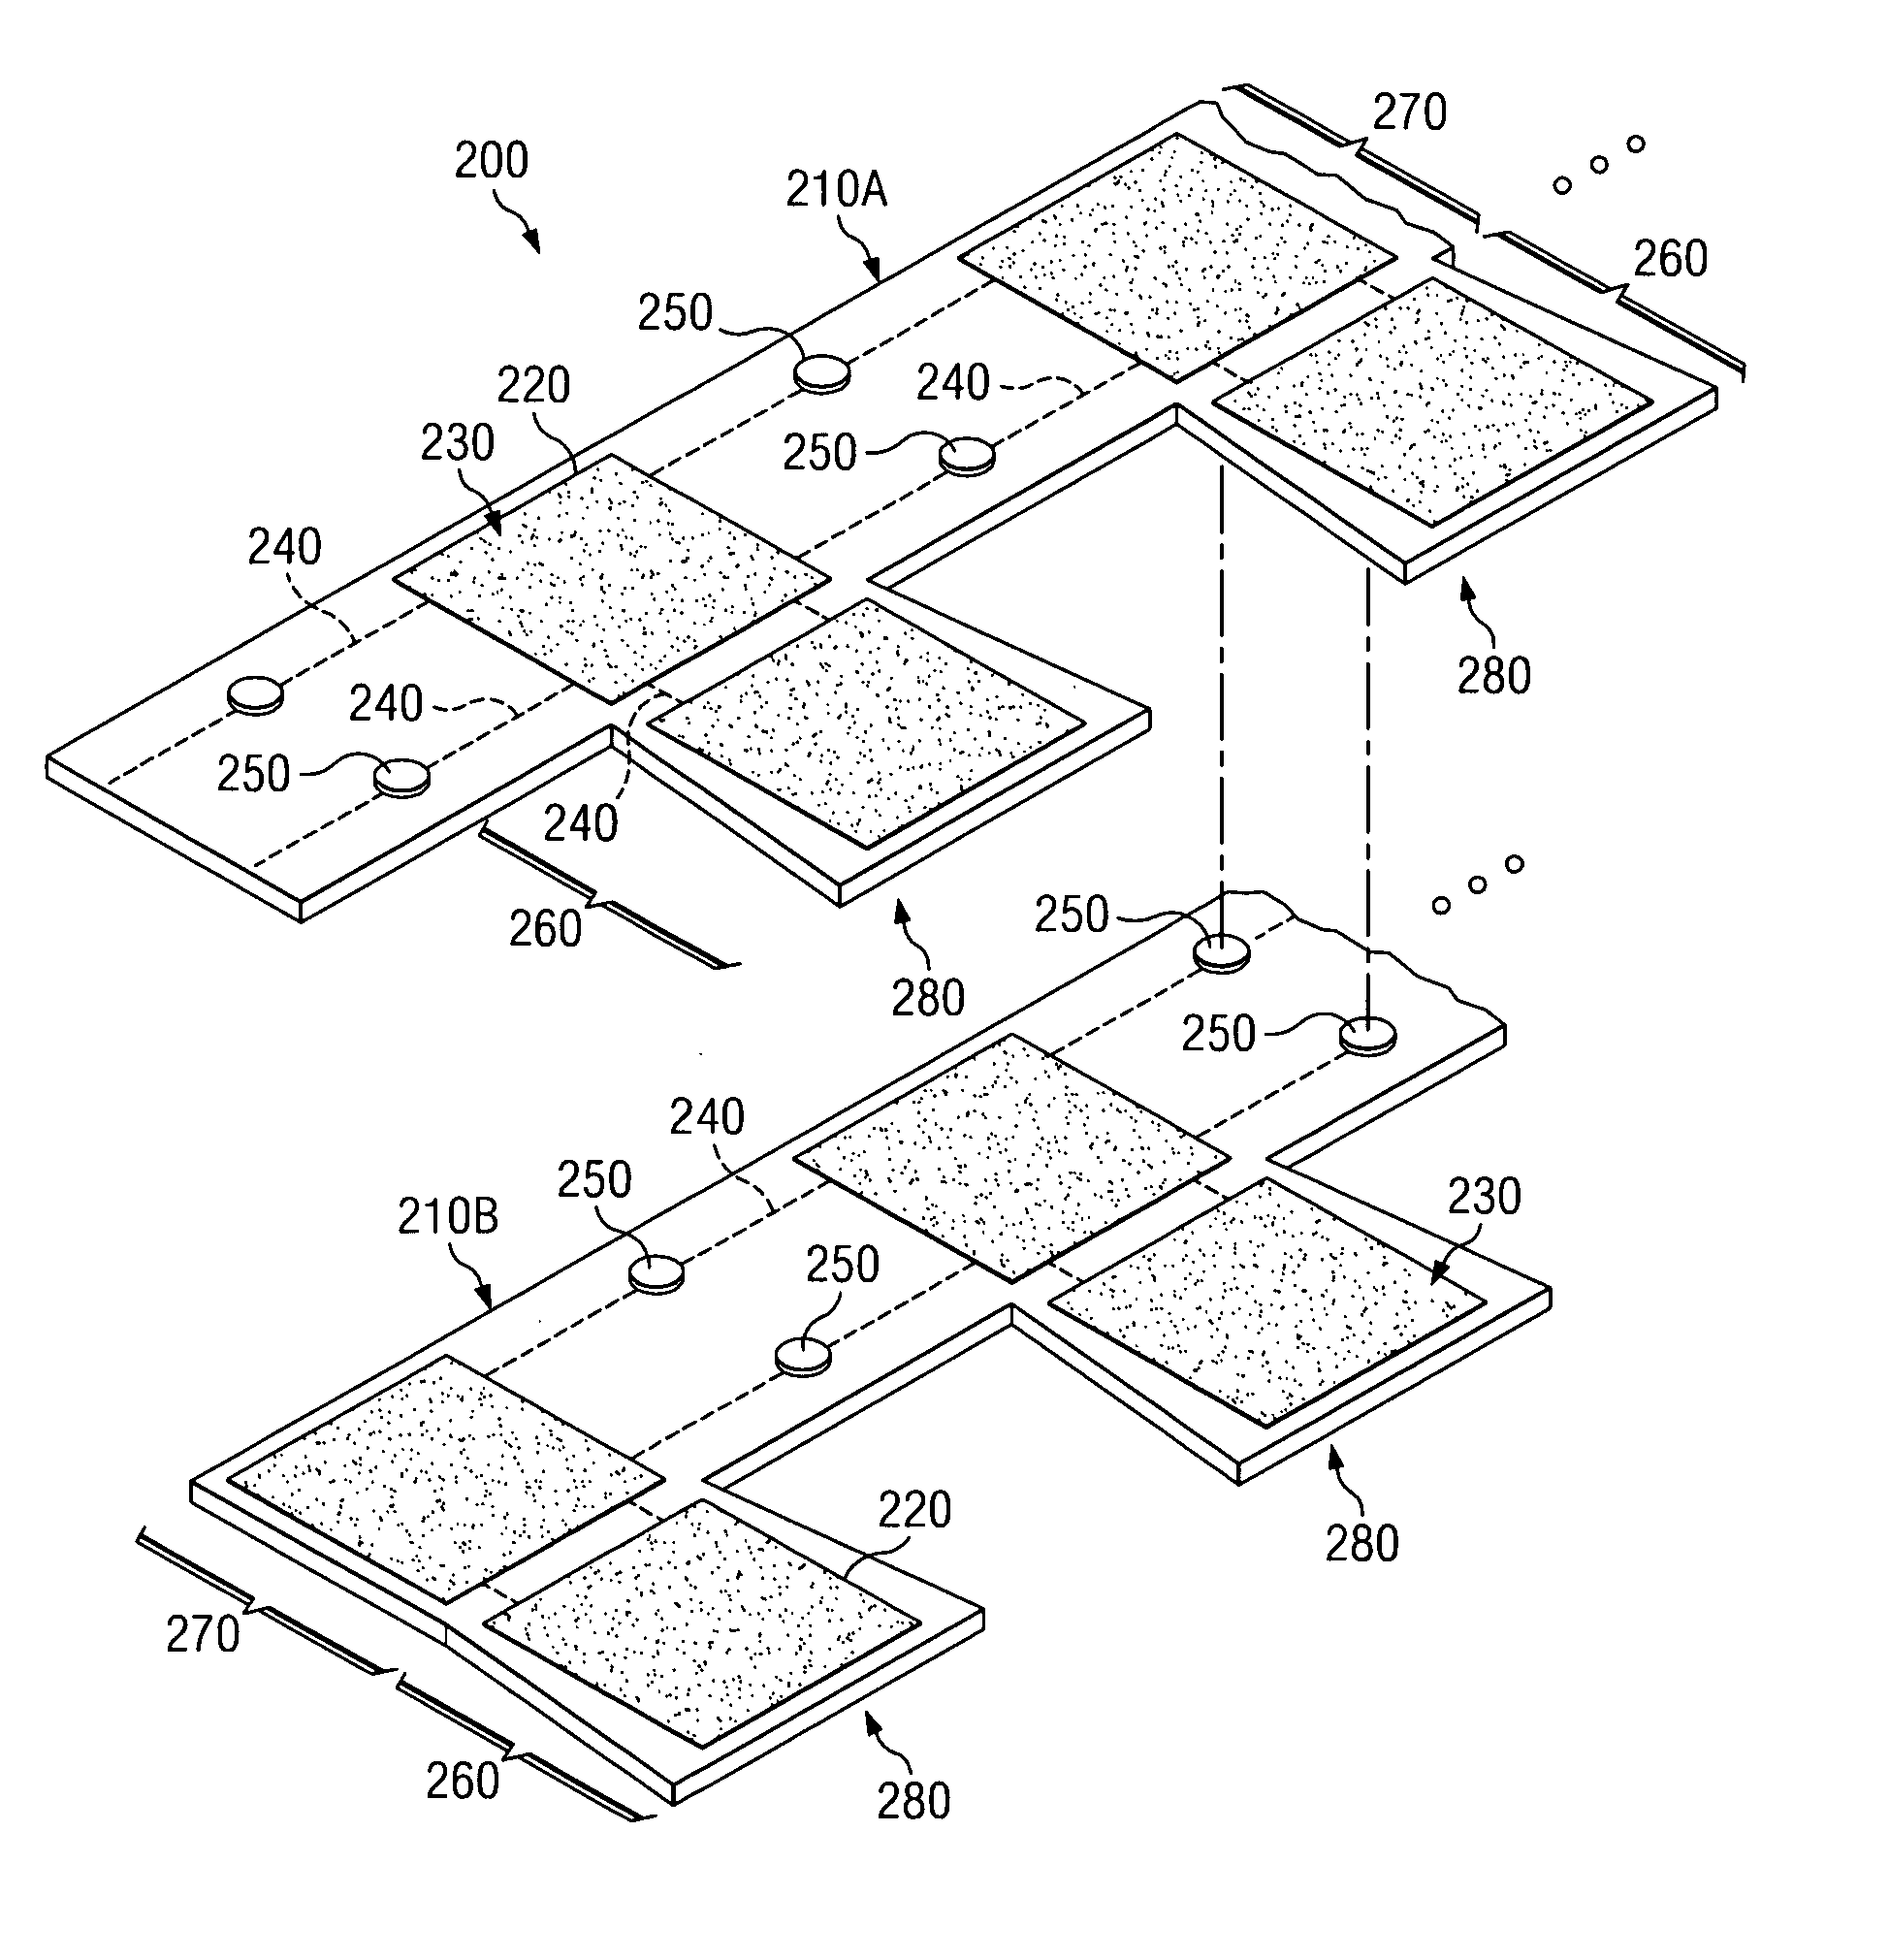 Flexible integrated photovoltaic roofing membrane and related methods of manufacturing same